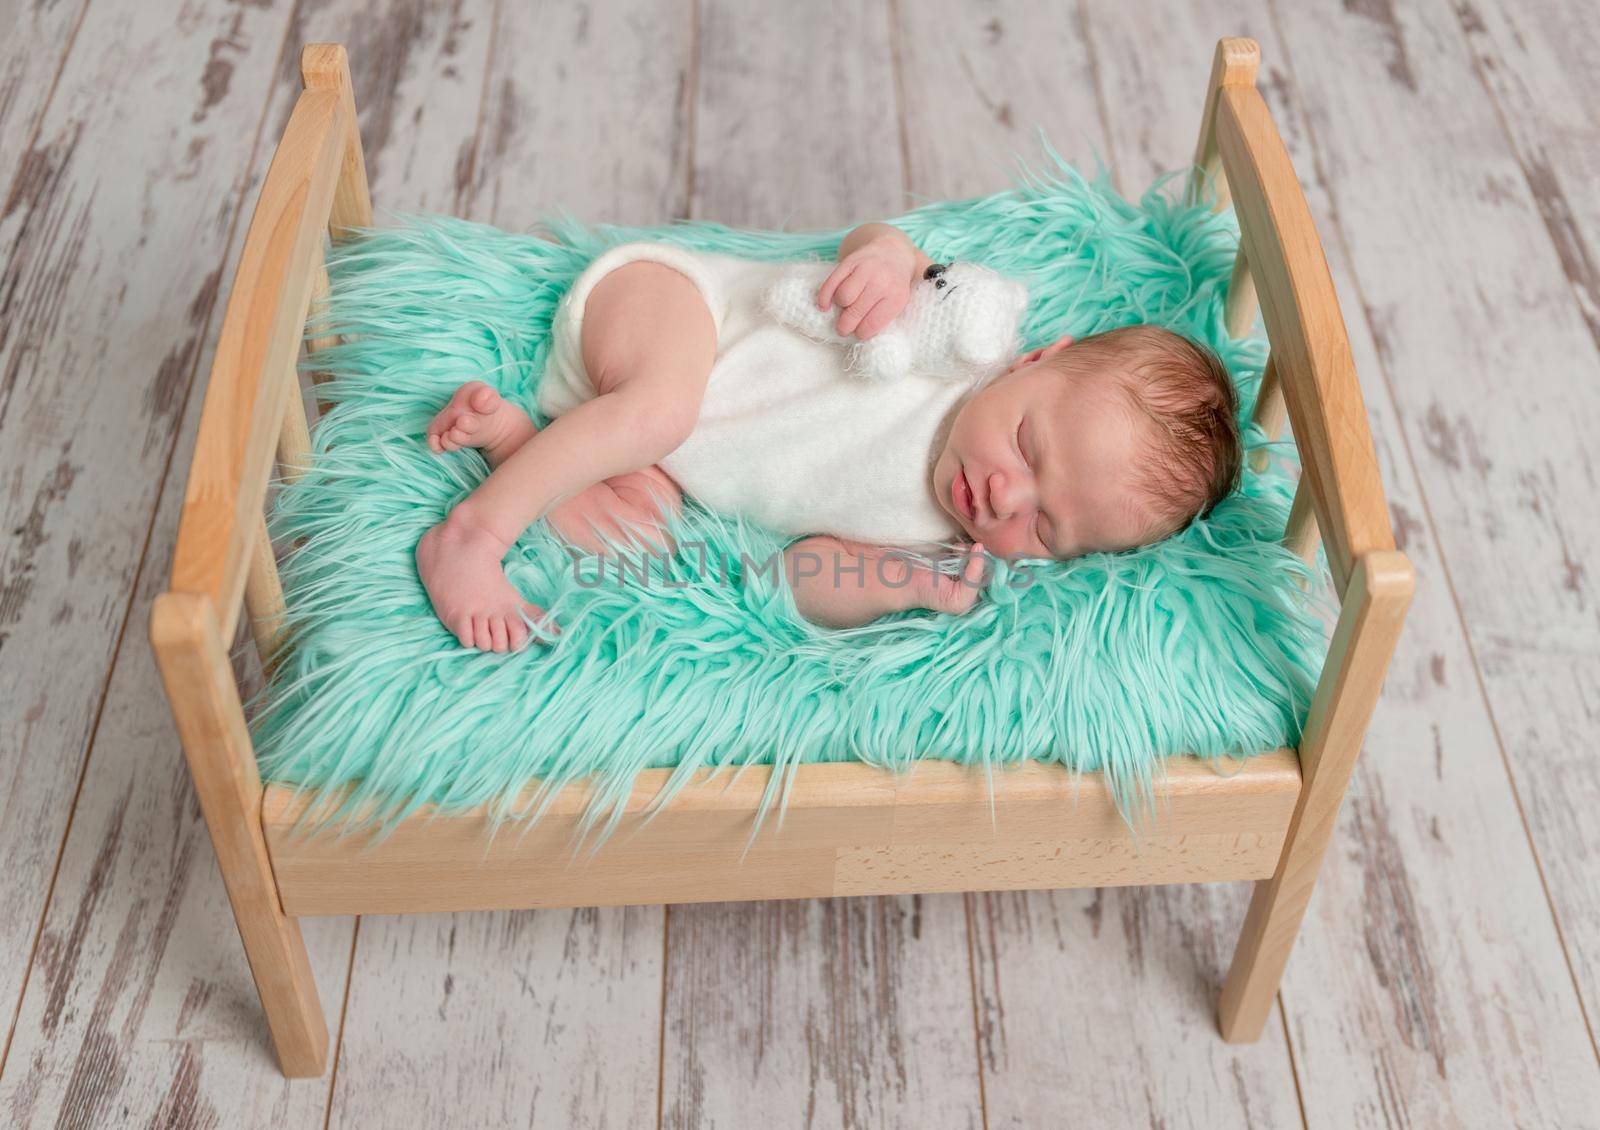 beautiful sleeping baby on wooden cot with turquoise blanket by tan4ikk1